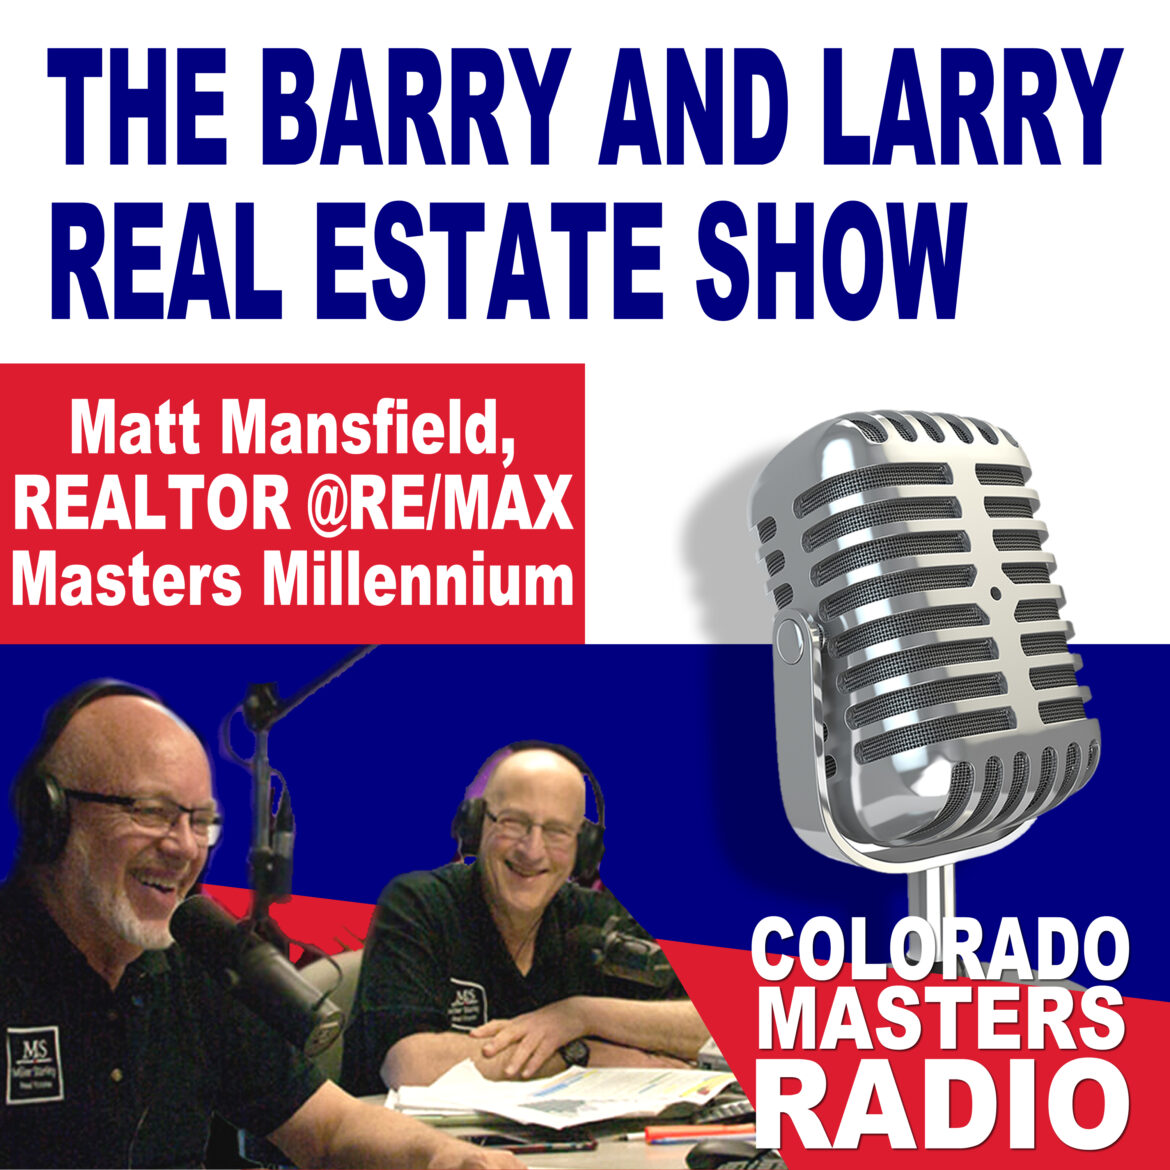 The Larry and Barry Real Estate Show - Working with Buyers